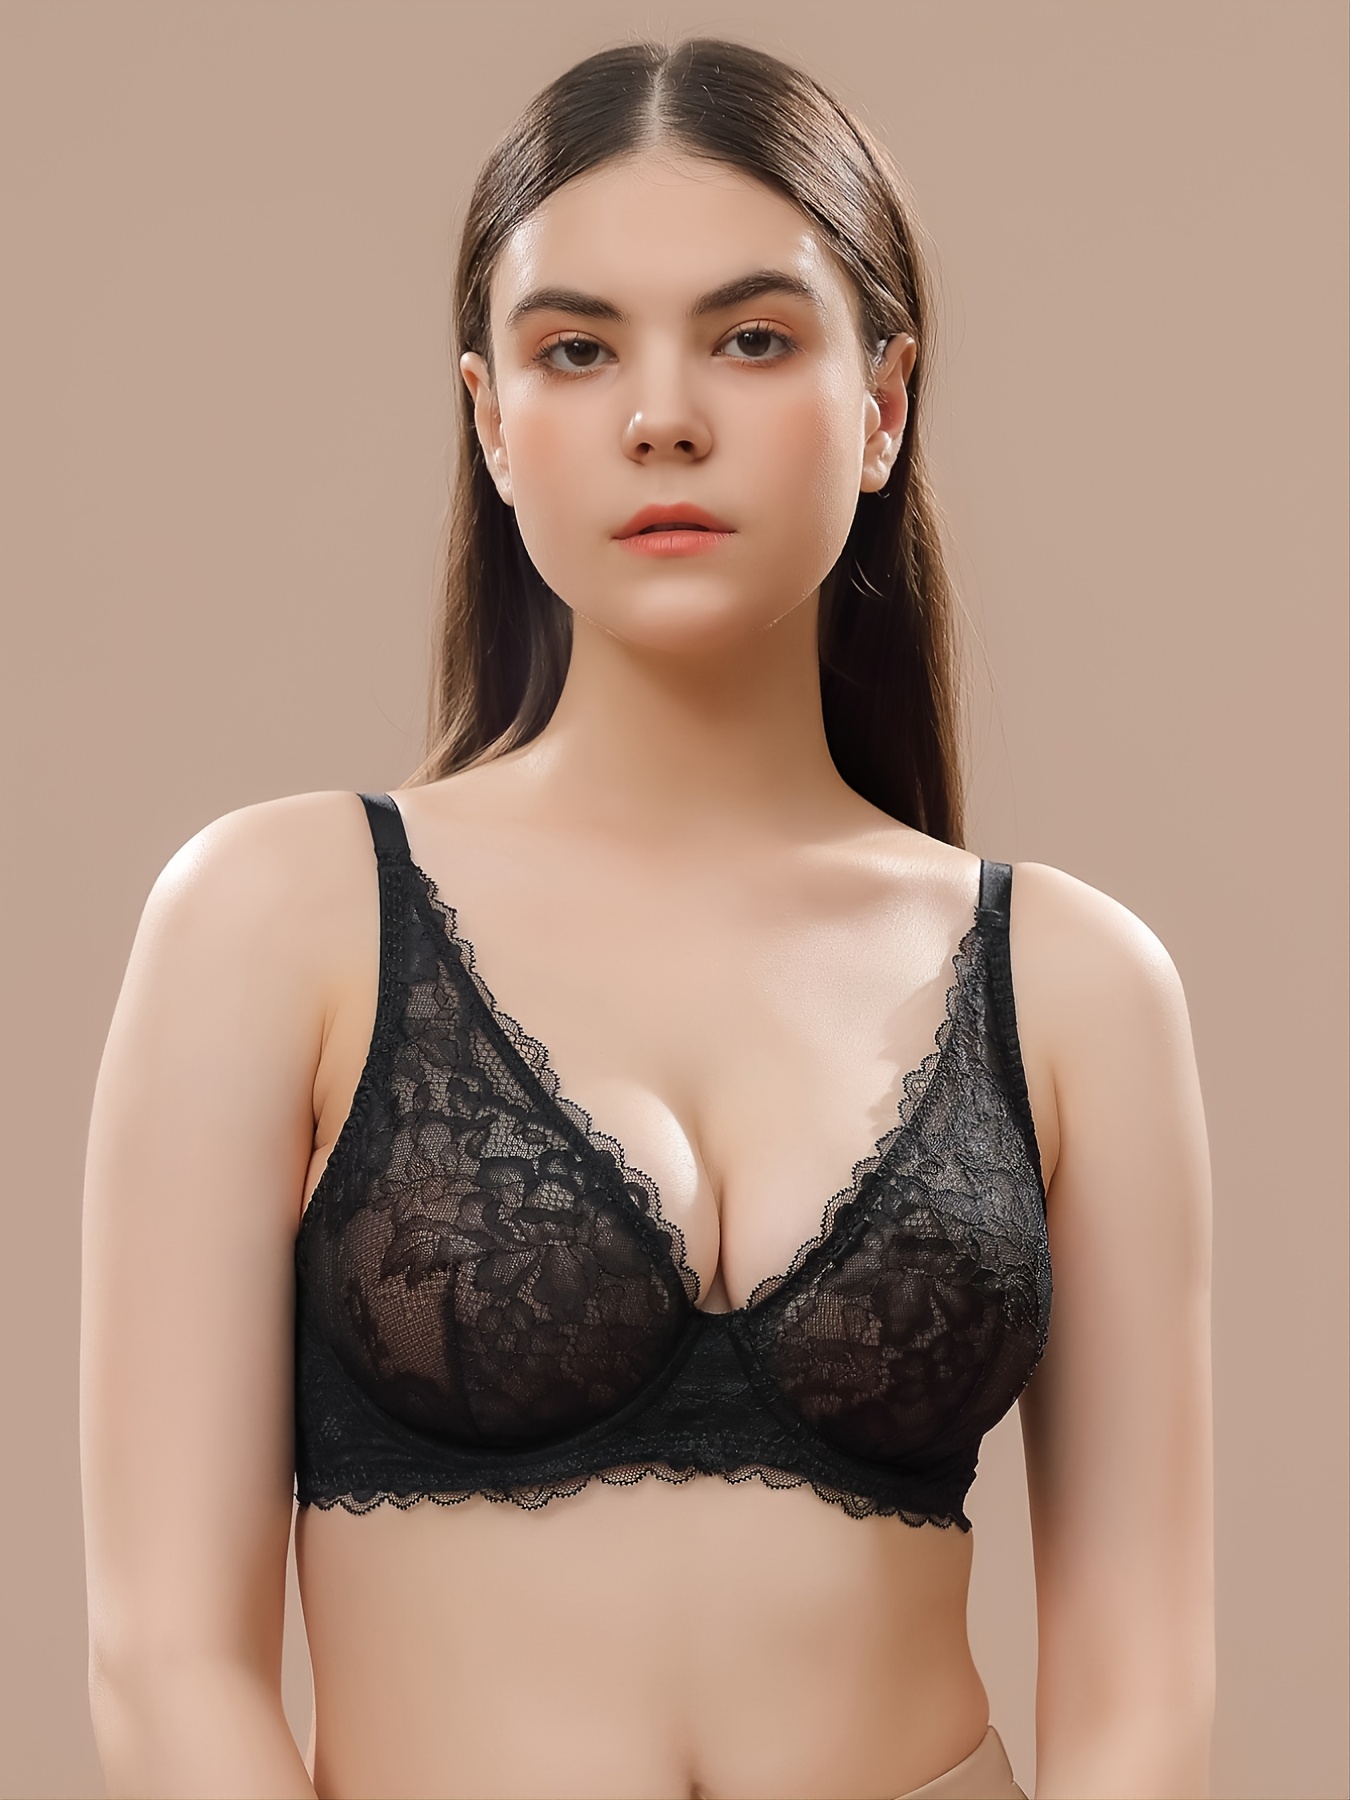 Women 2 Pcs Stretch Lace Unpadded And Underwire Bra, Black and Beige